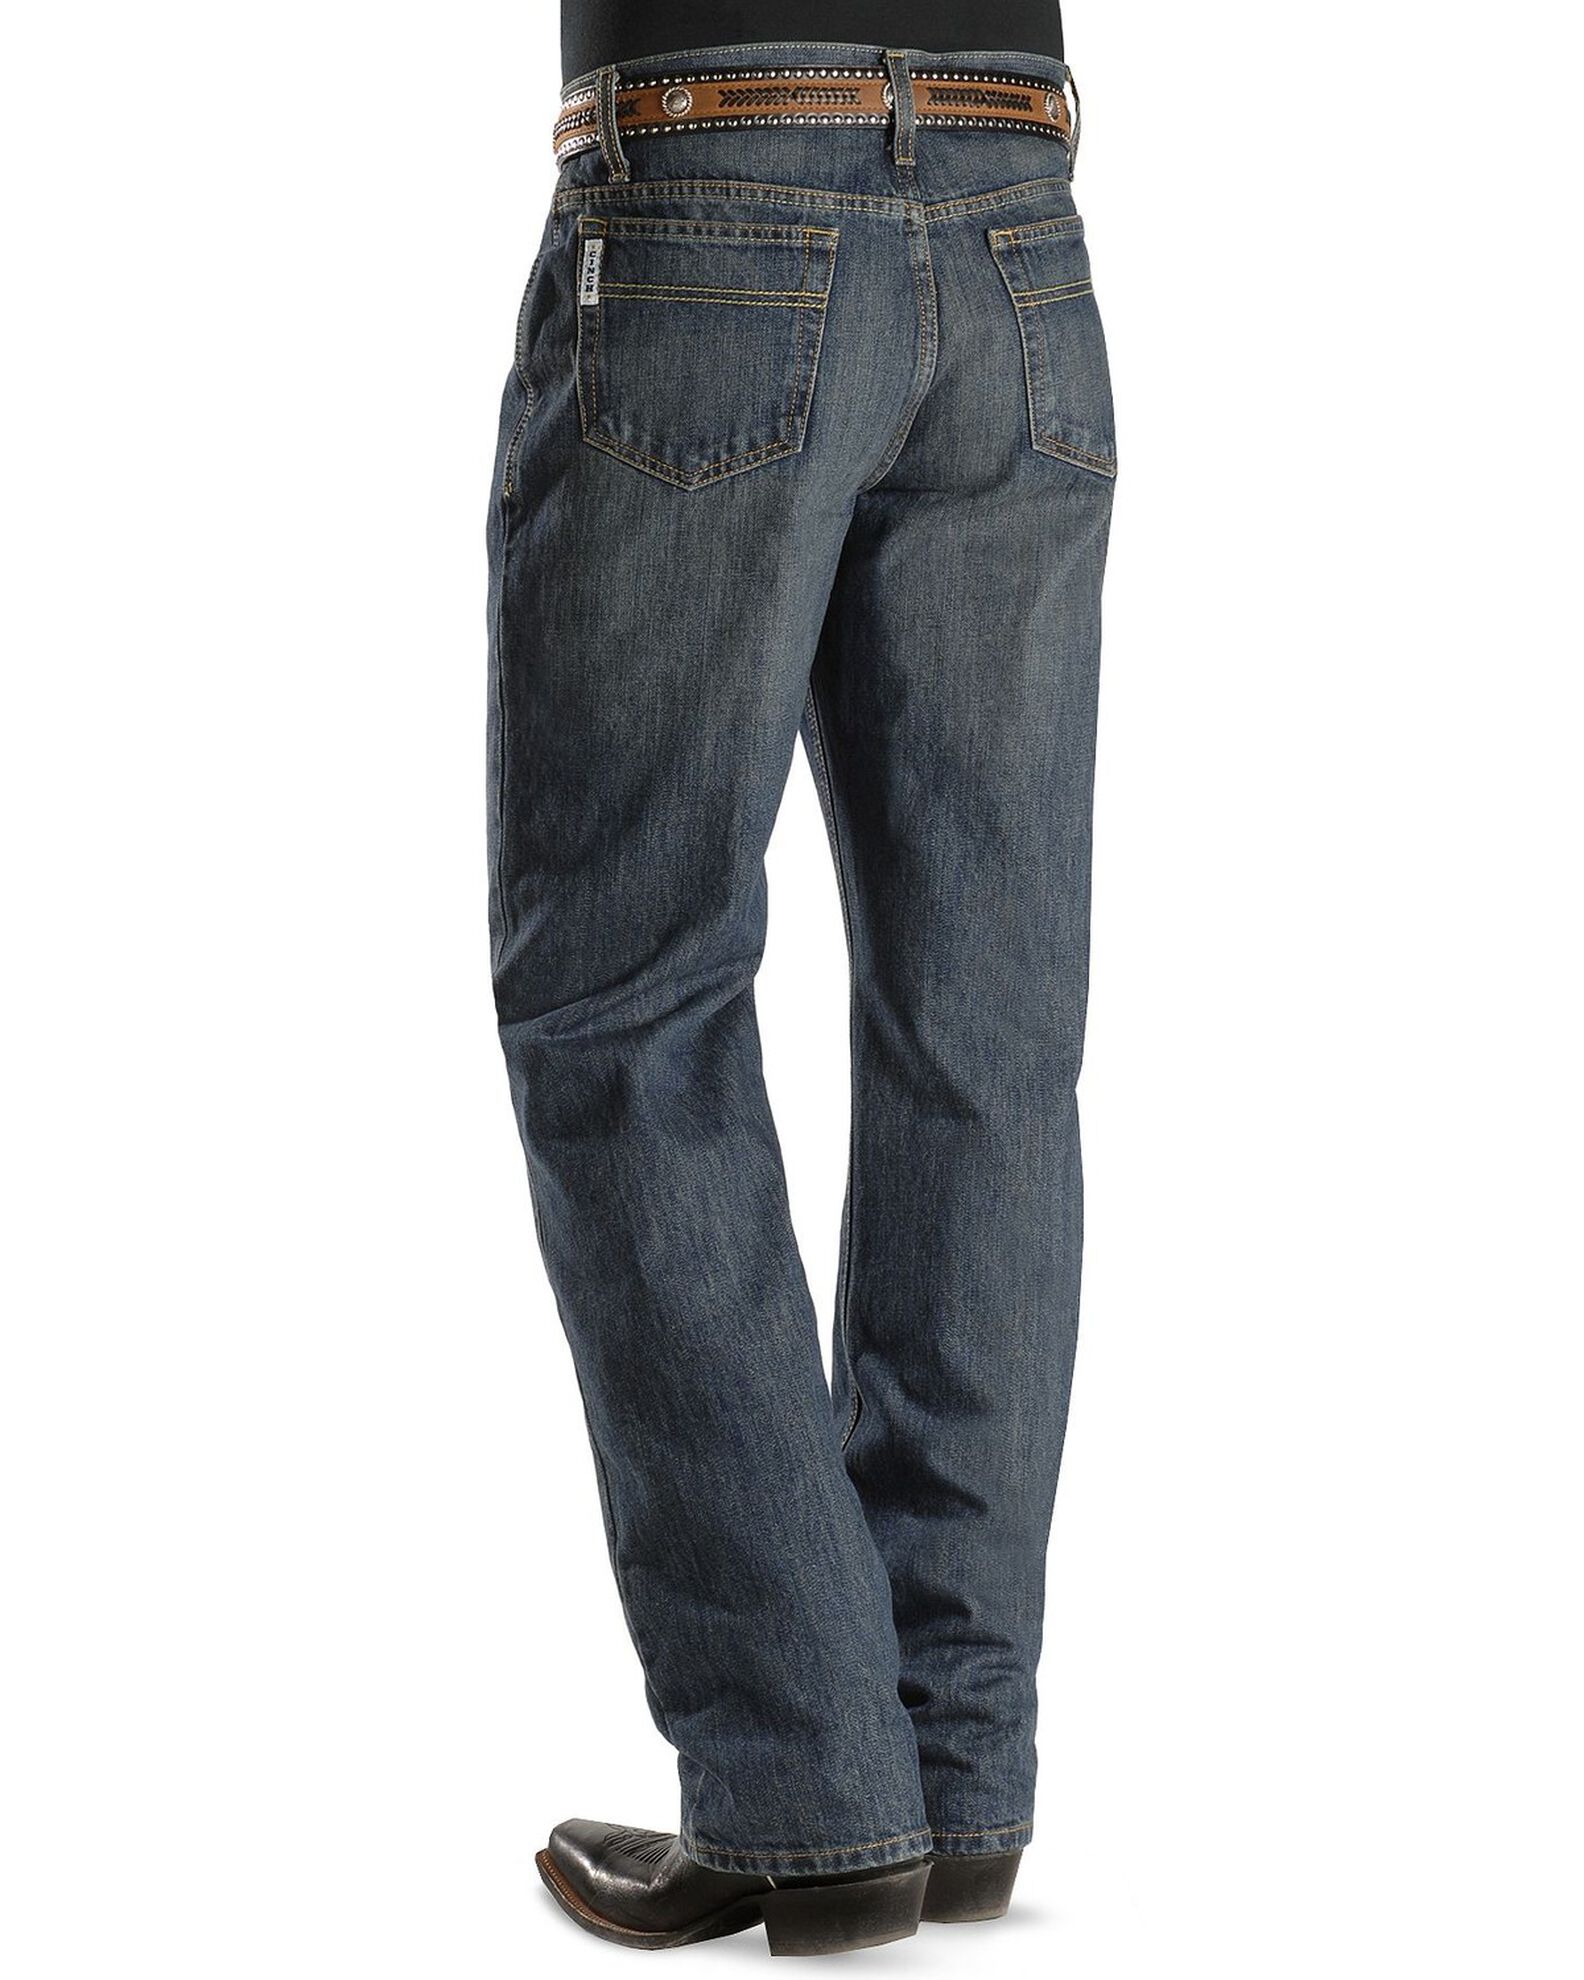 Cinch Jeans - White Label Relaxed Fit - 38 & 40 Tall Inseams - Country  Outfitter